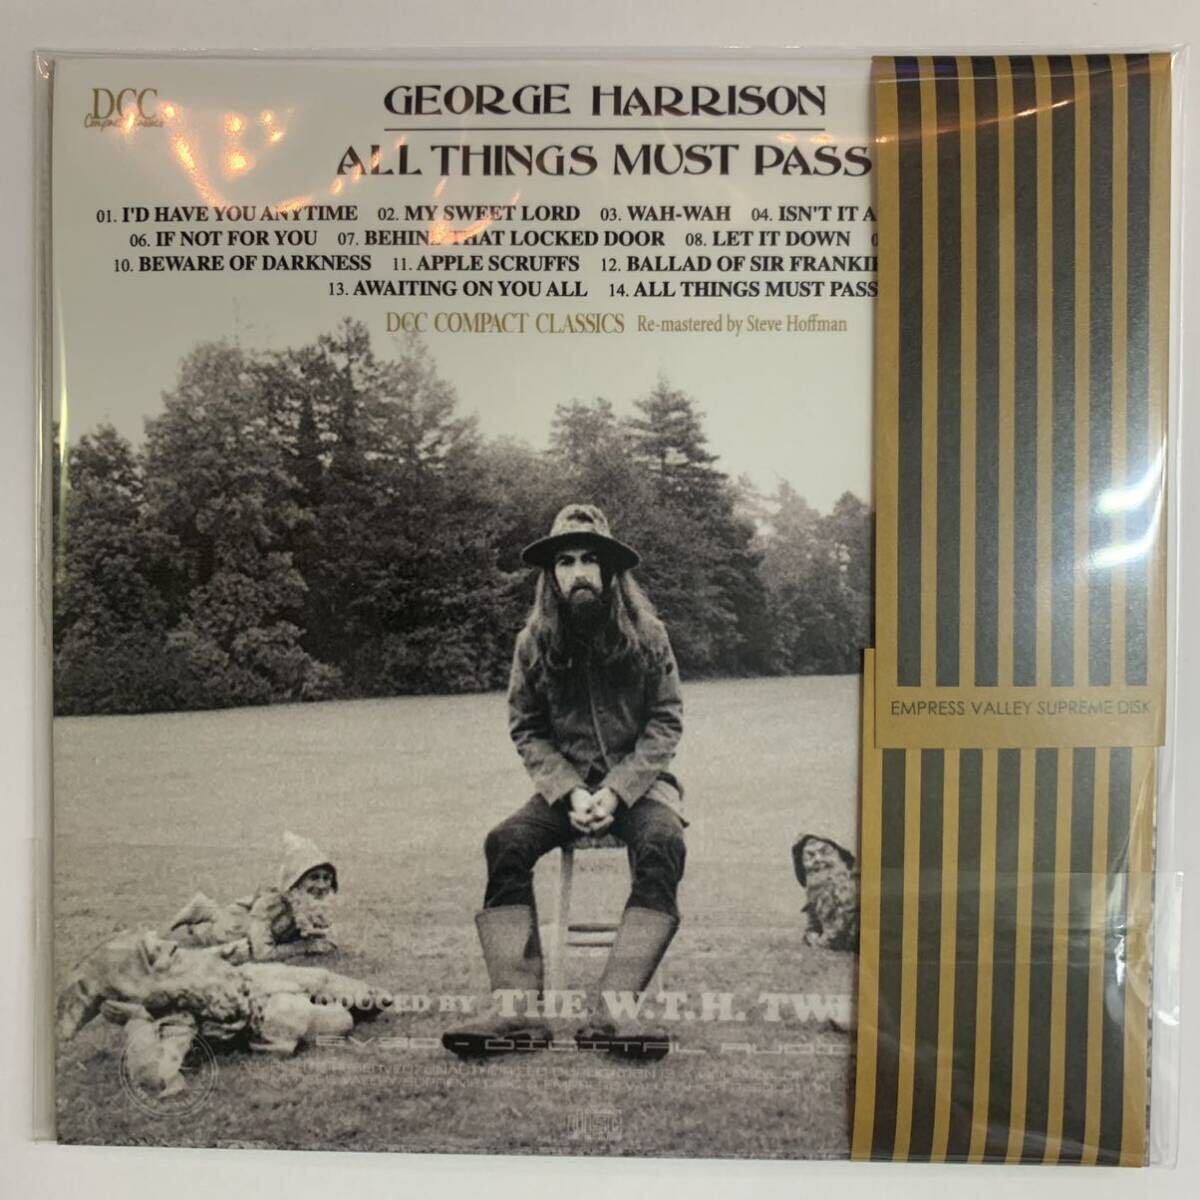 GEORGE HARRISON / ALL THINGS MUST PASS DCC COMPACT CLASSICS Remastered by Steve Hoffman (CD) это милый бумага жакет specification *